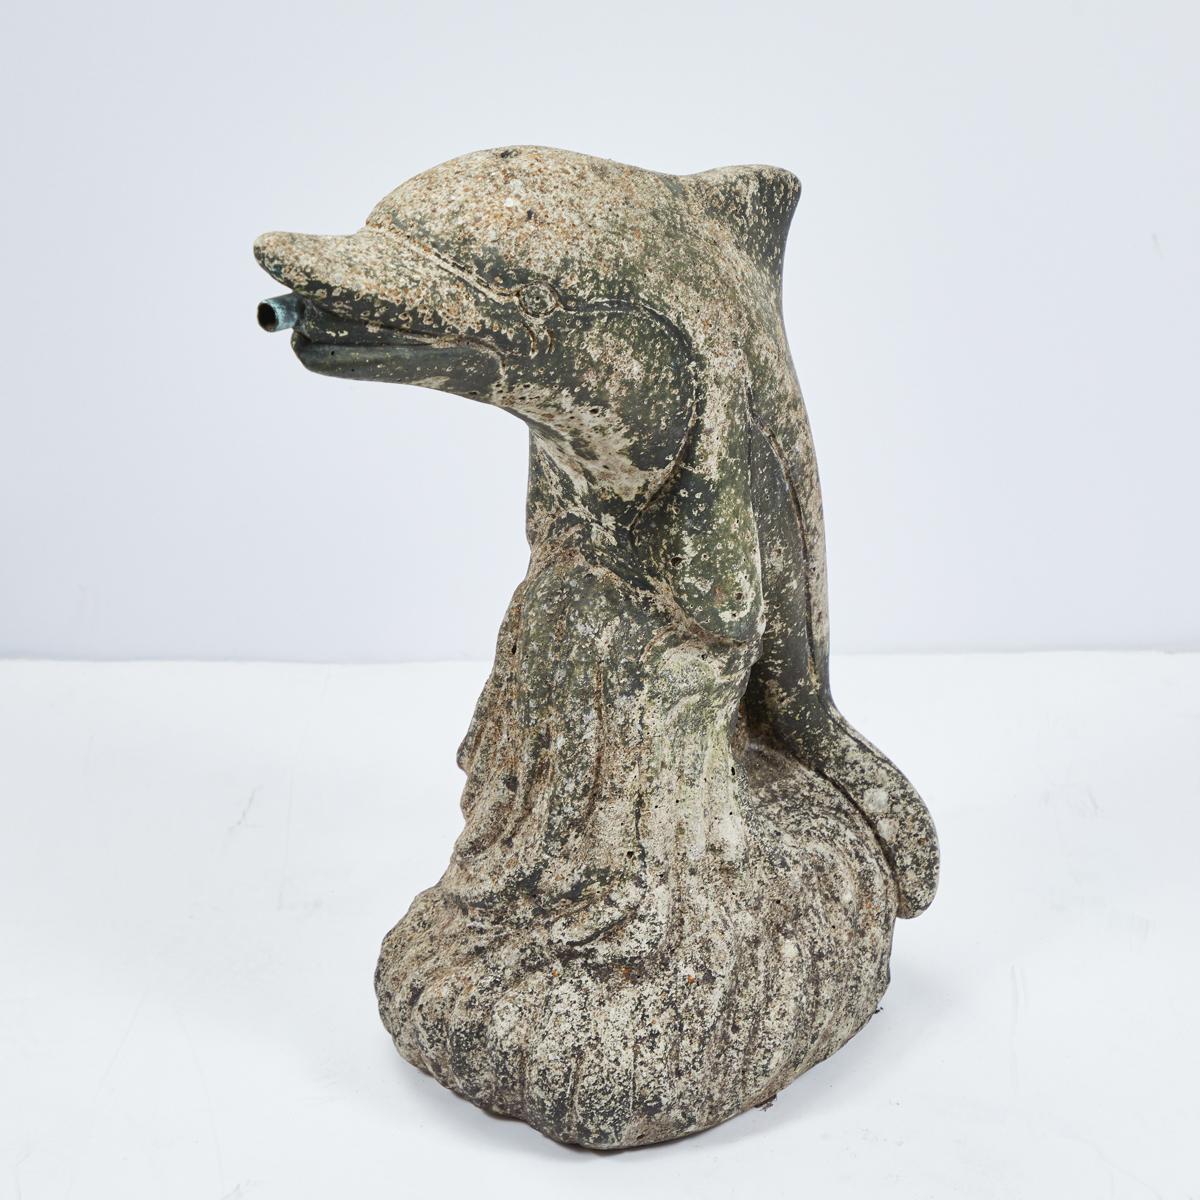 Midcentury stone dolphin fountain from England.